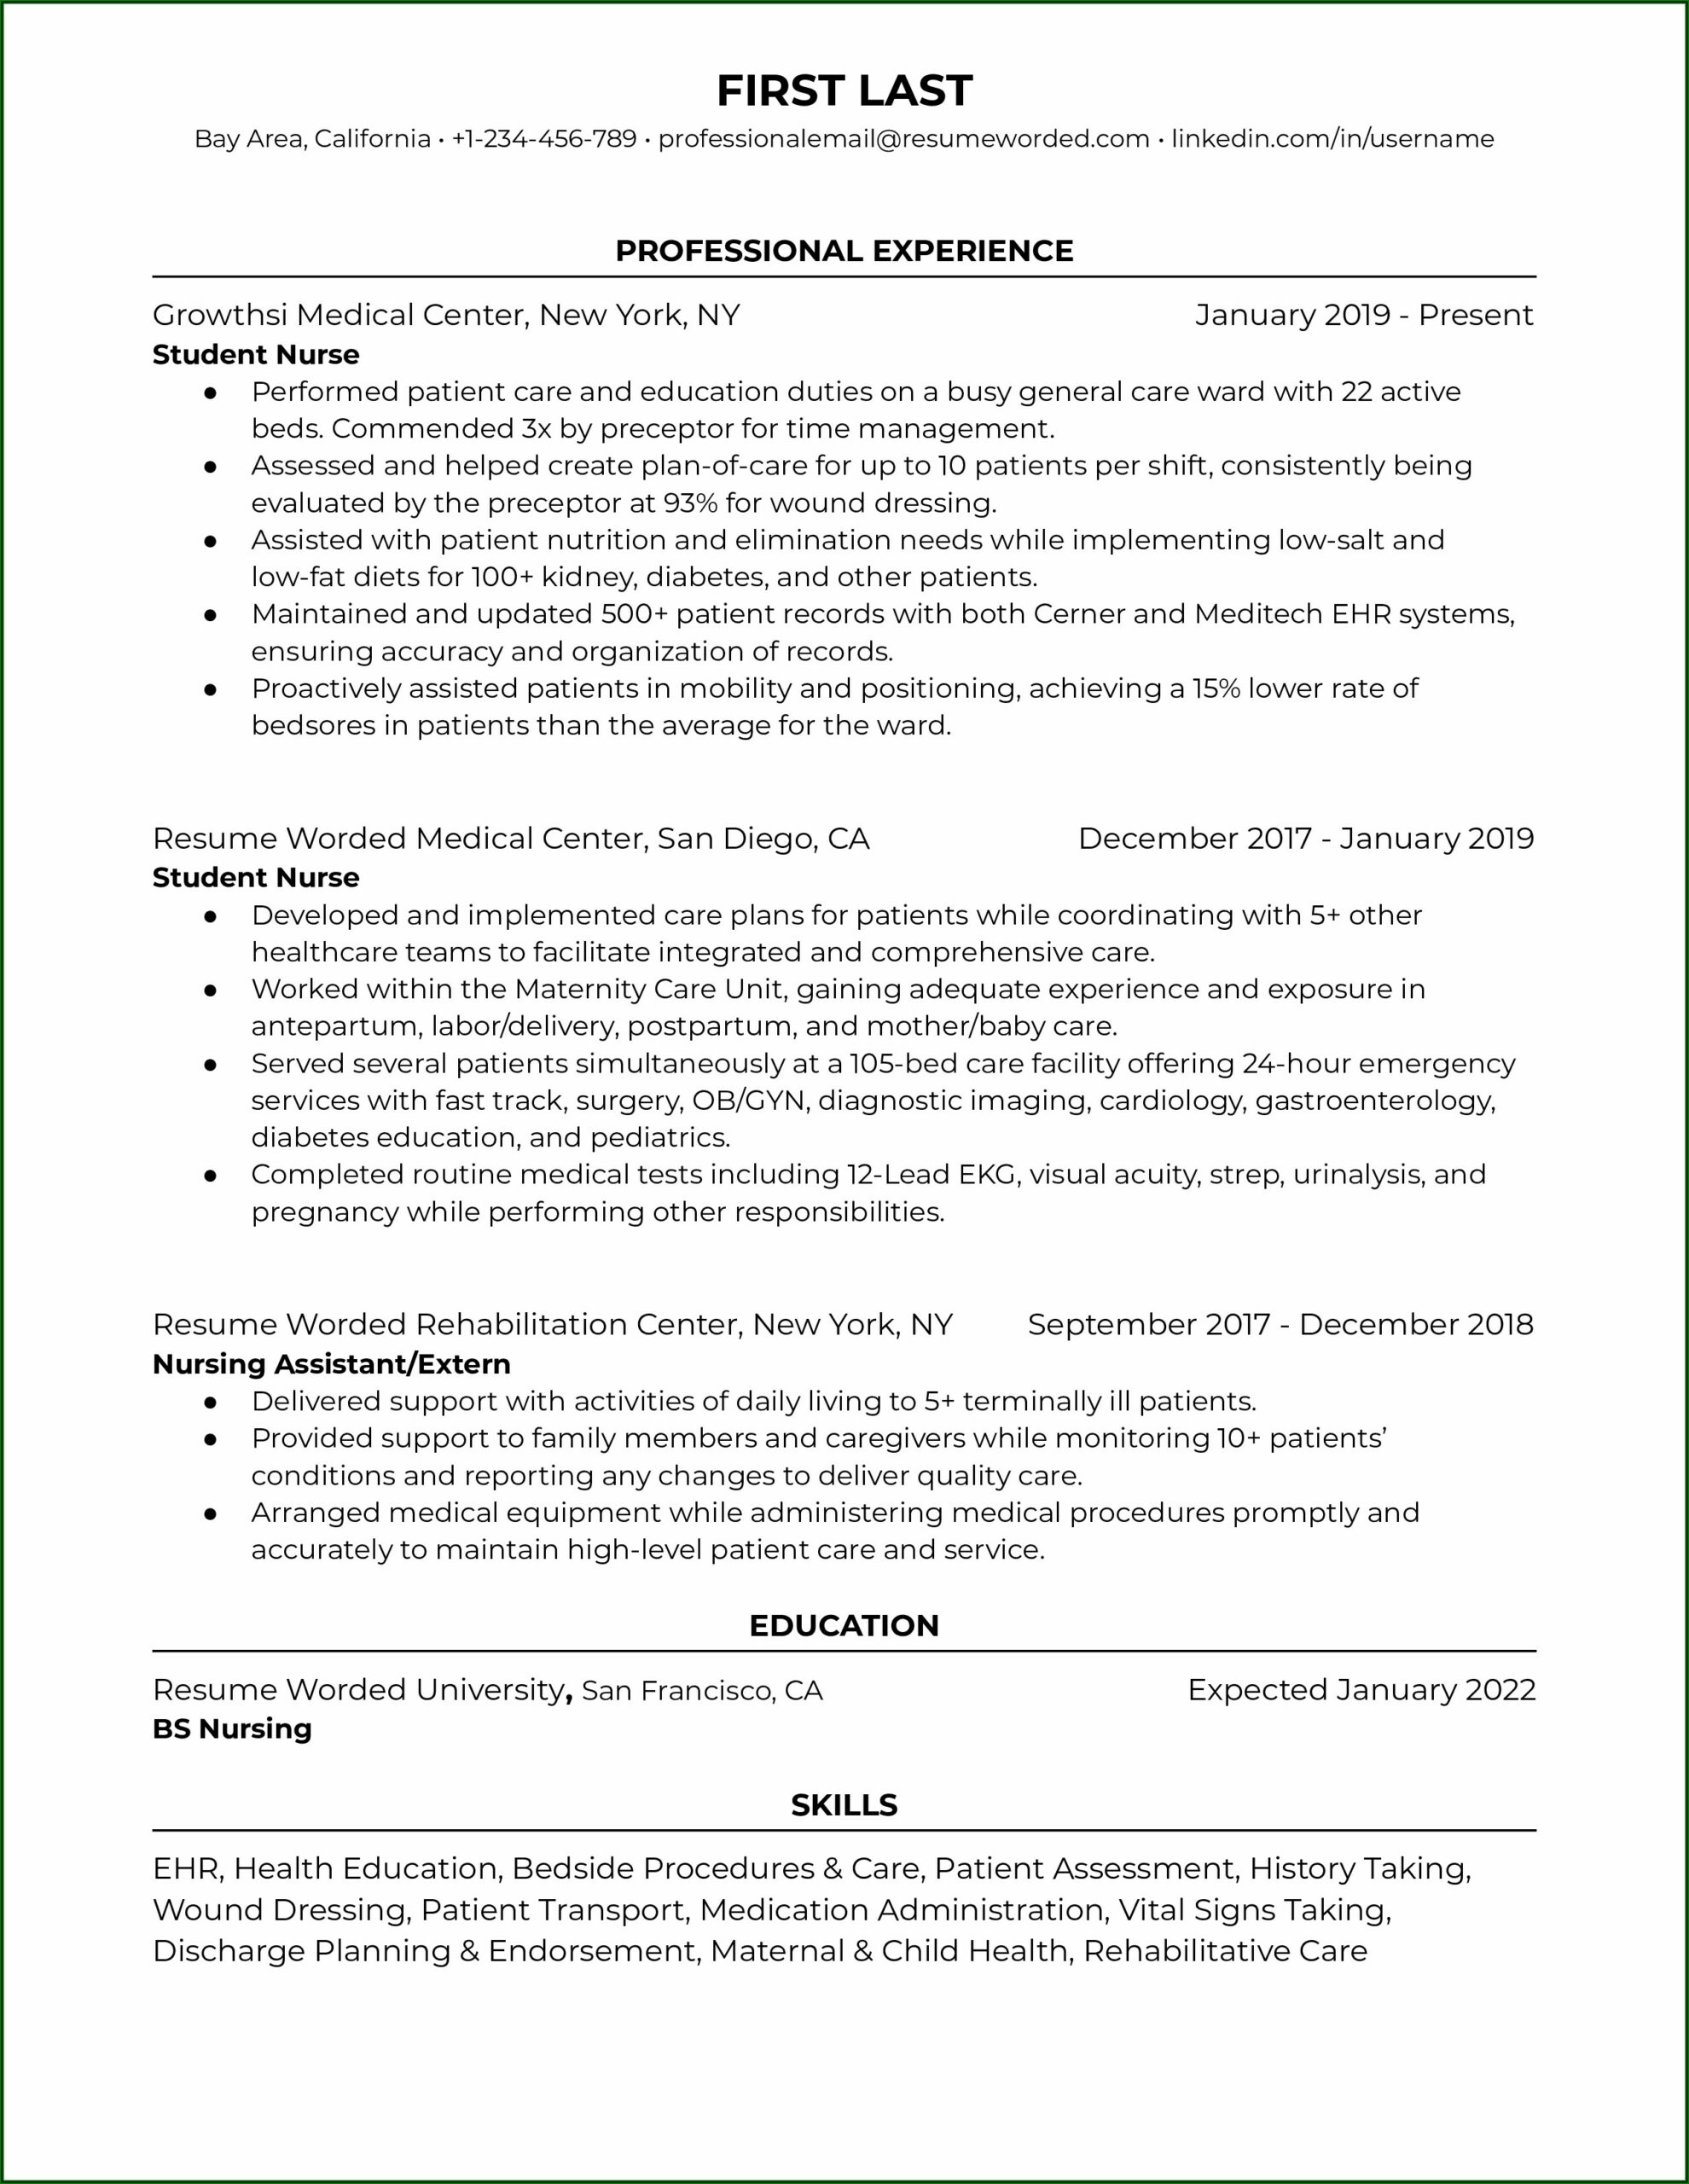 Sample Resume For Nursing Graduate Without Experience